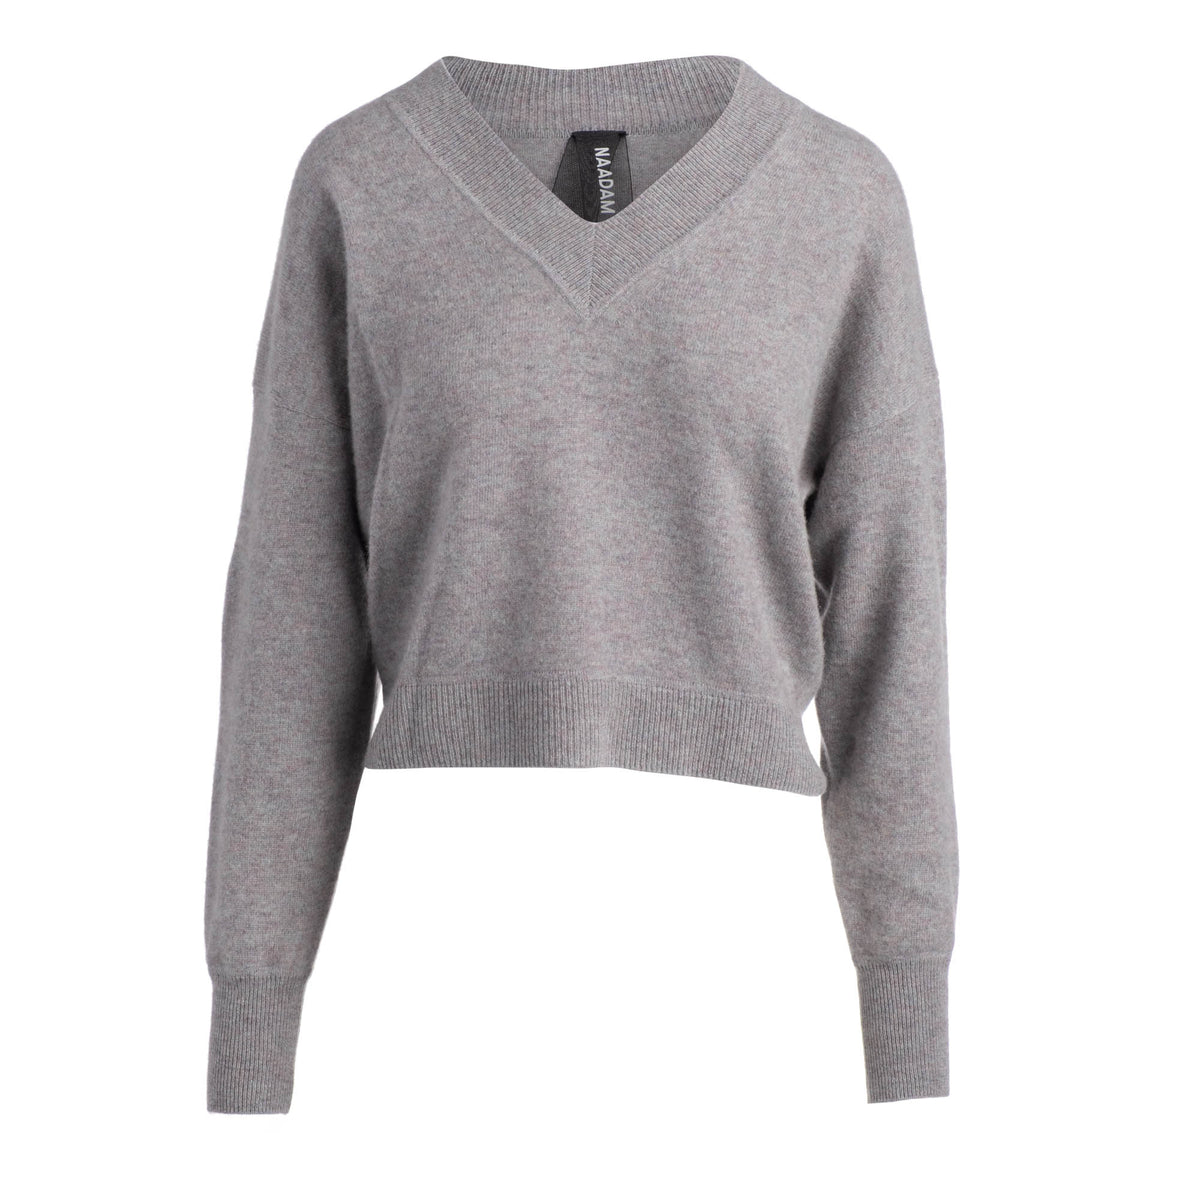 V NECK CROPPED CREW PULLOVER - MARIED GRAY